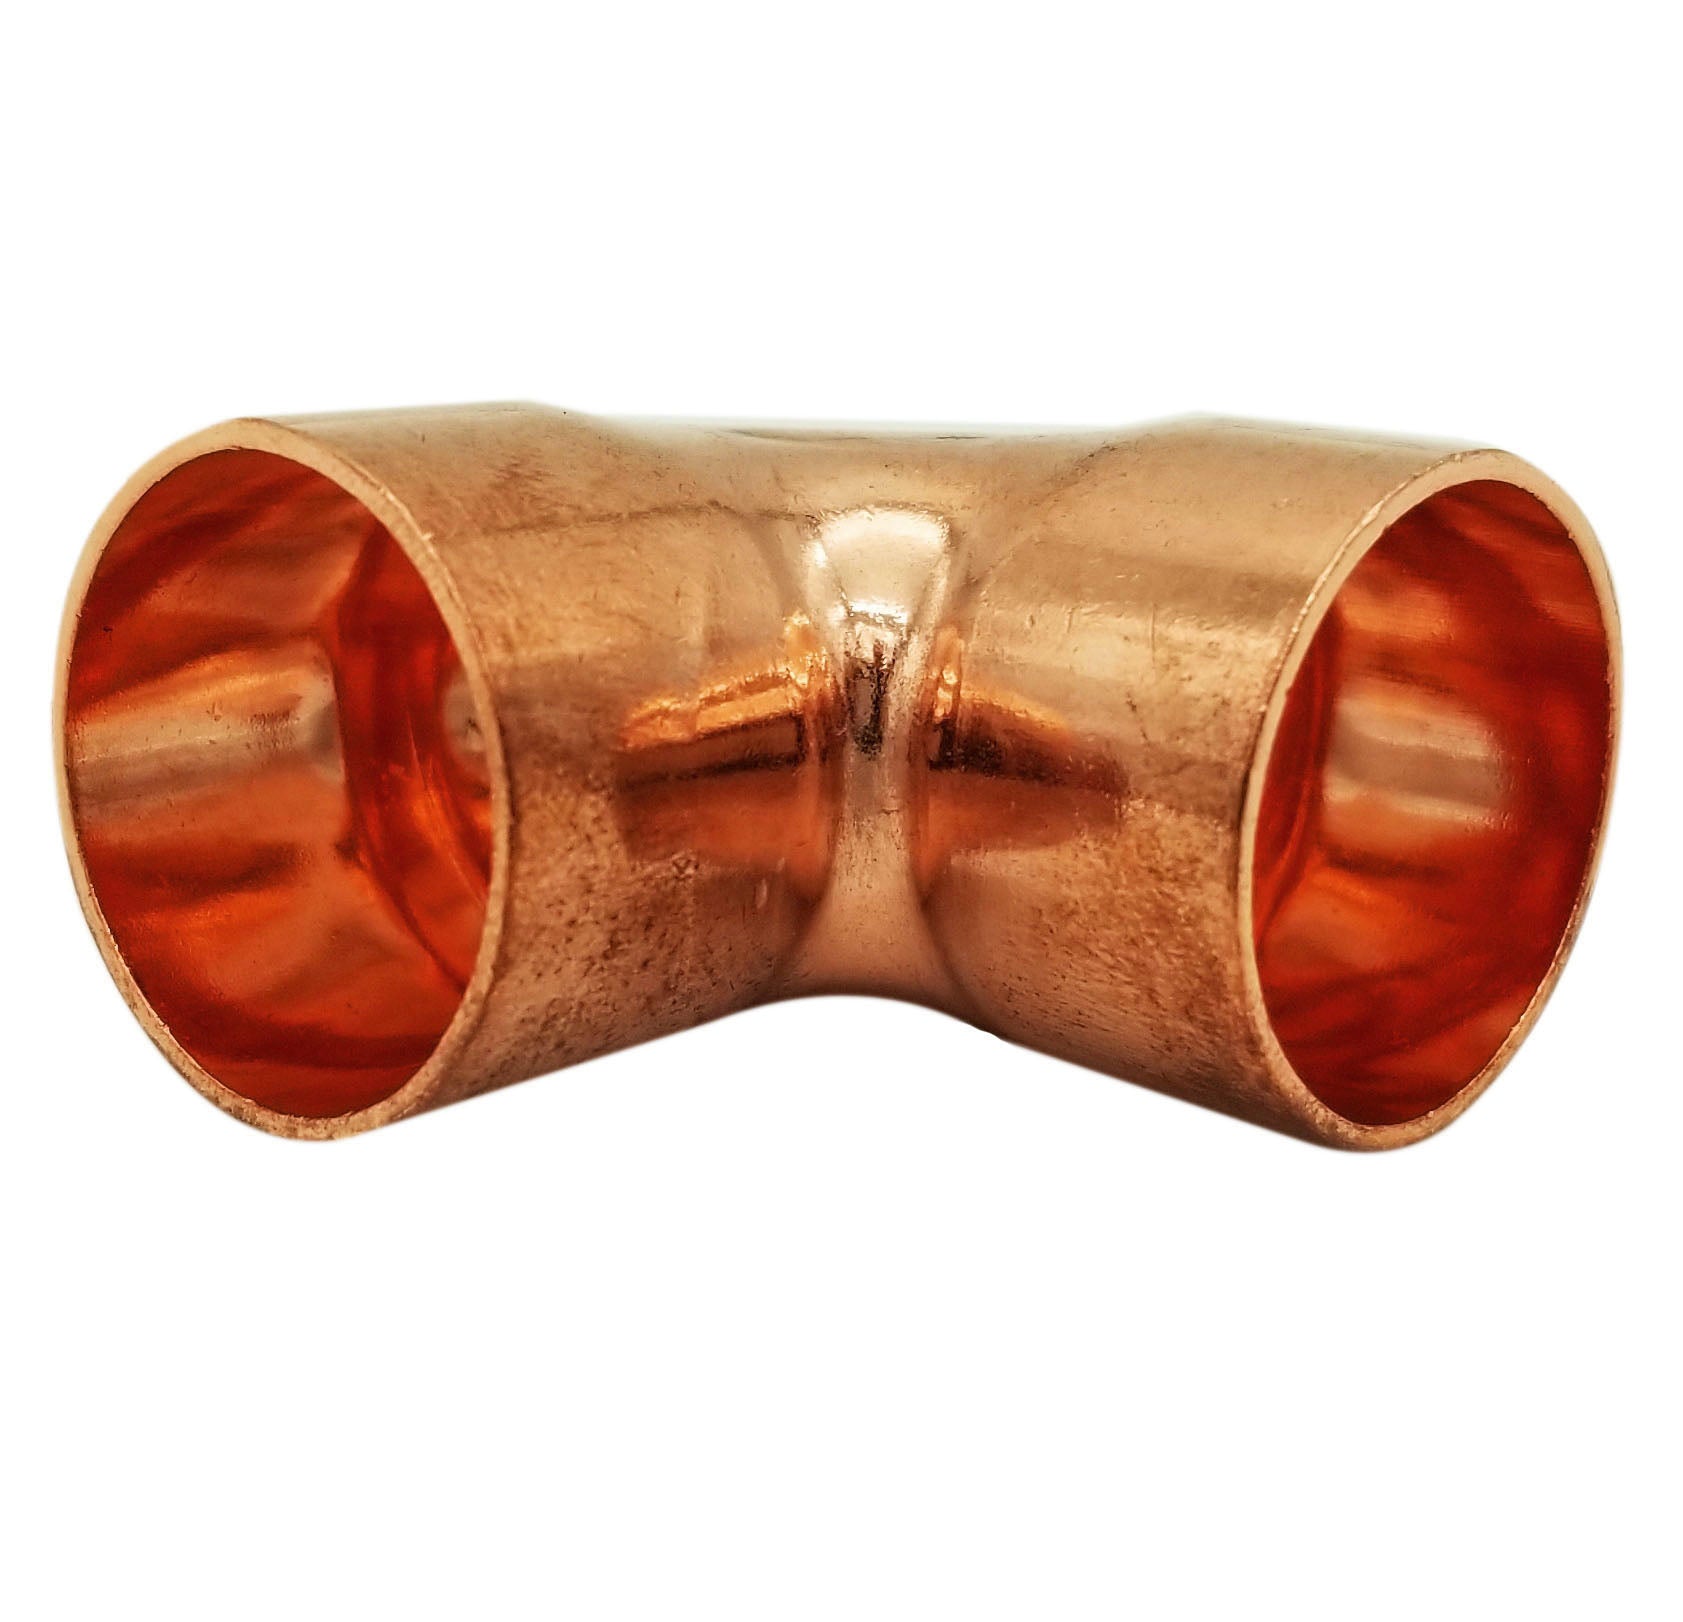 Copper Fitting 7/8 Inch (HVAC Outer Dimension) 3/4 Inch (Plumbing Inner Dimension) - 45 Degree Copper Pressure Elbow & HVAC – 99.9% Pure Copper - 10 Pack